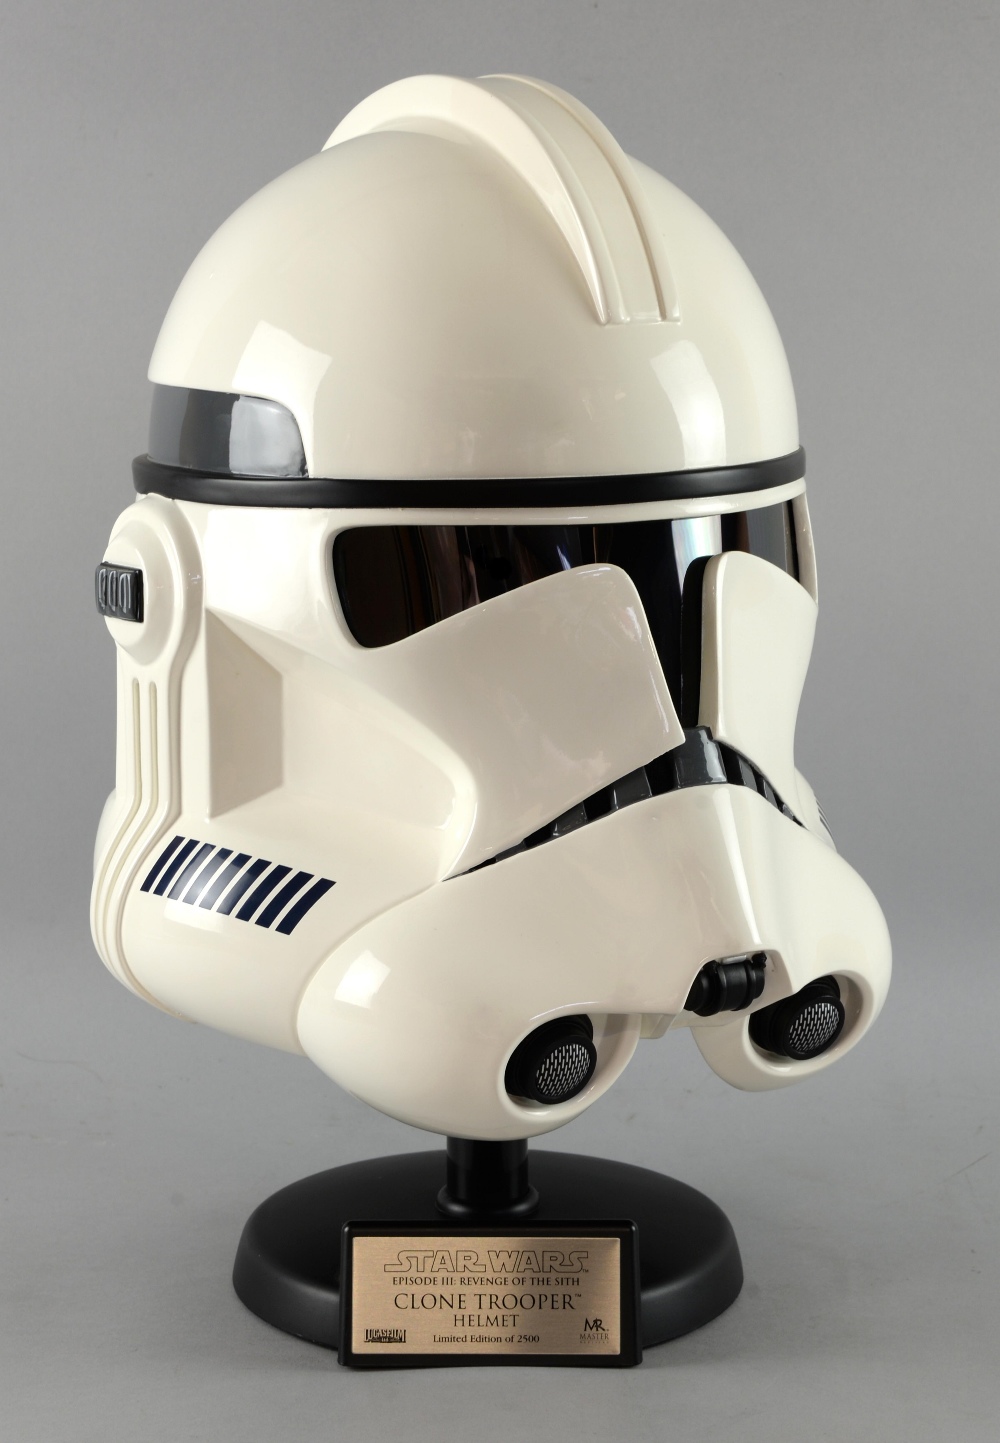 Star Wars - Master Replicas Episode III; Revenge of the Sith Clone Trooper Helmet, Limited Edition - Image 3 of 6